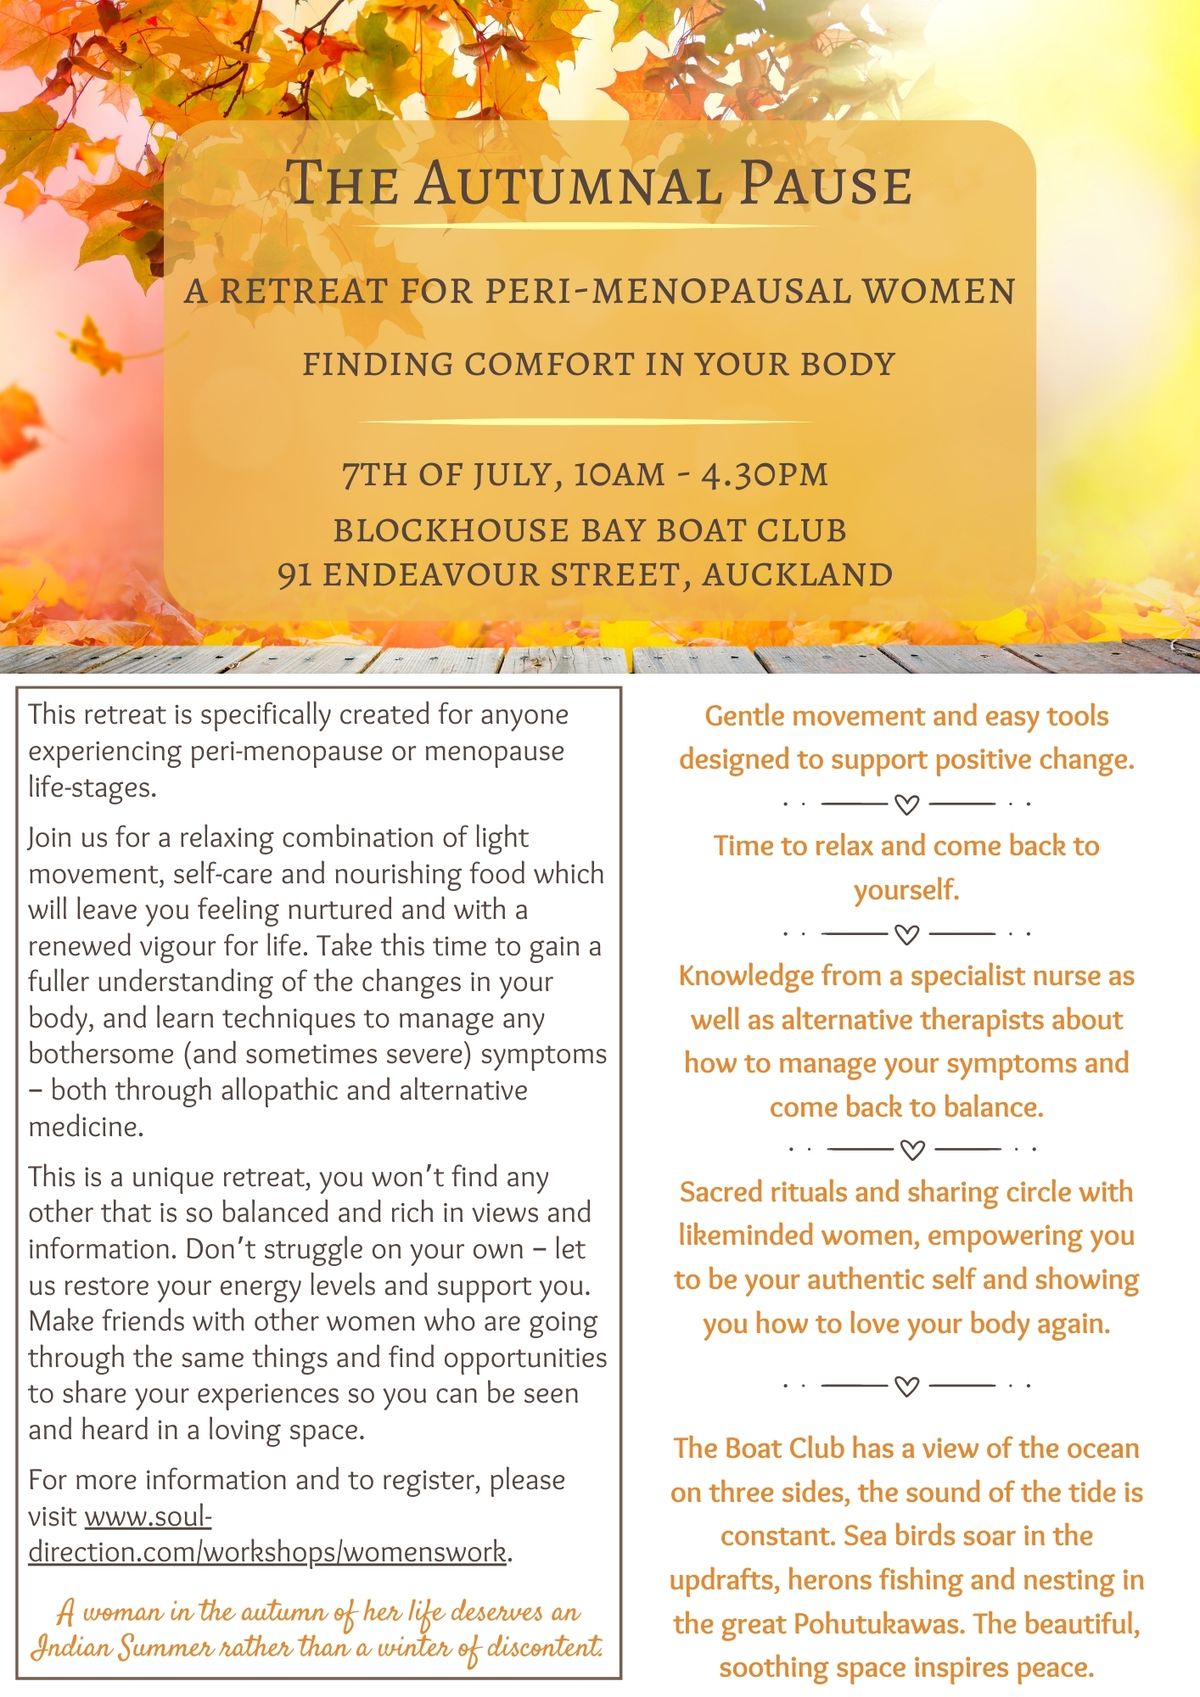 The Autumnal Pause retreat for peri-menopausal women